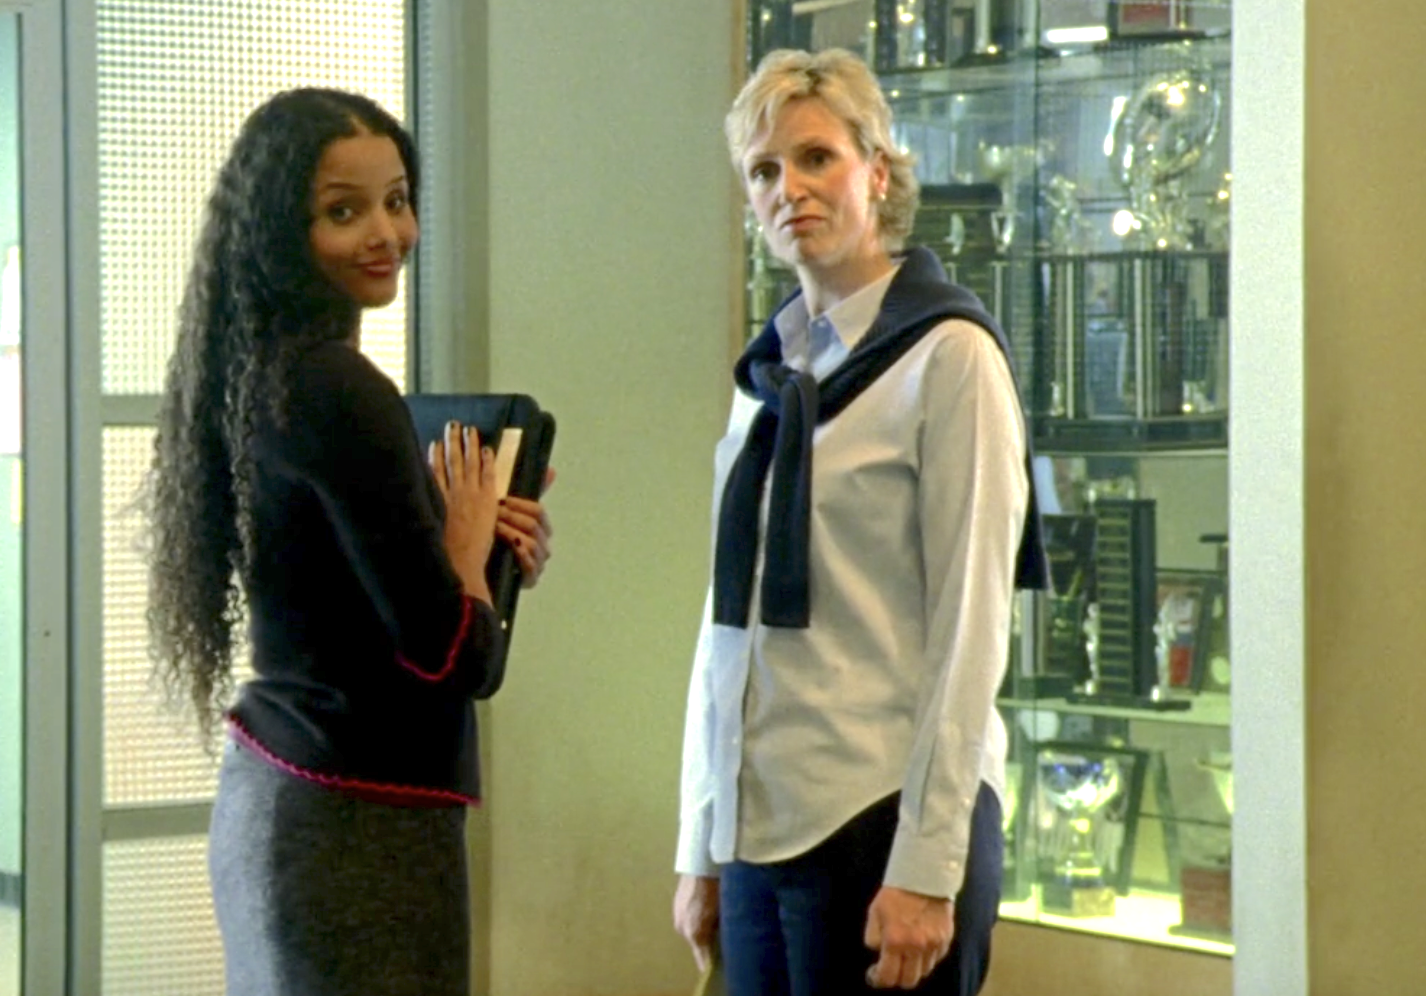 Screenshot from S1E6 of Veronica Mars. Ms. Dent and Ms. Donaldson are standing in the hallway of Neptune High. Ms. Dent has her head turned, smiling at an off-screen Veronica. Mrs. Donaldson looks perturbed.